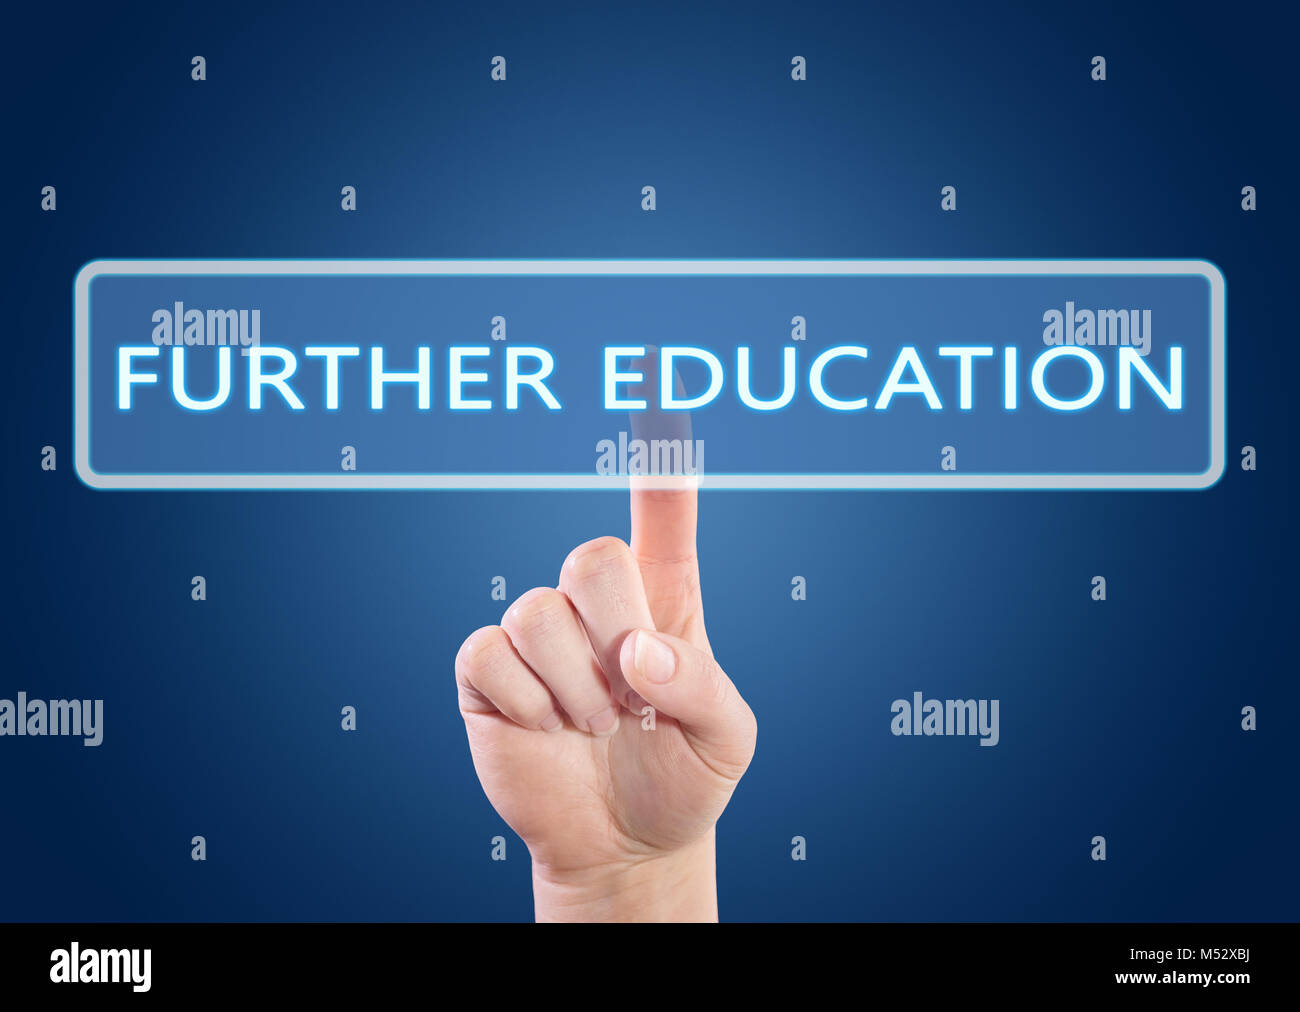 Further Education text concept Stock Photo